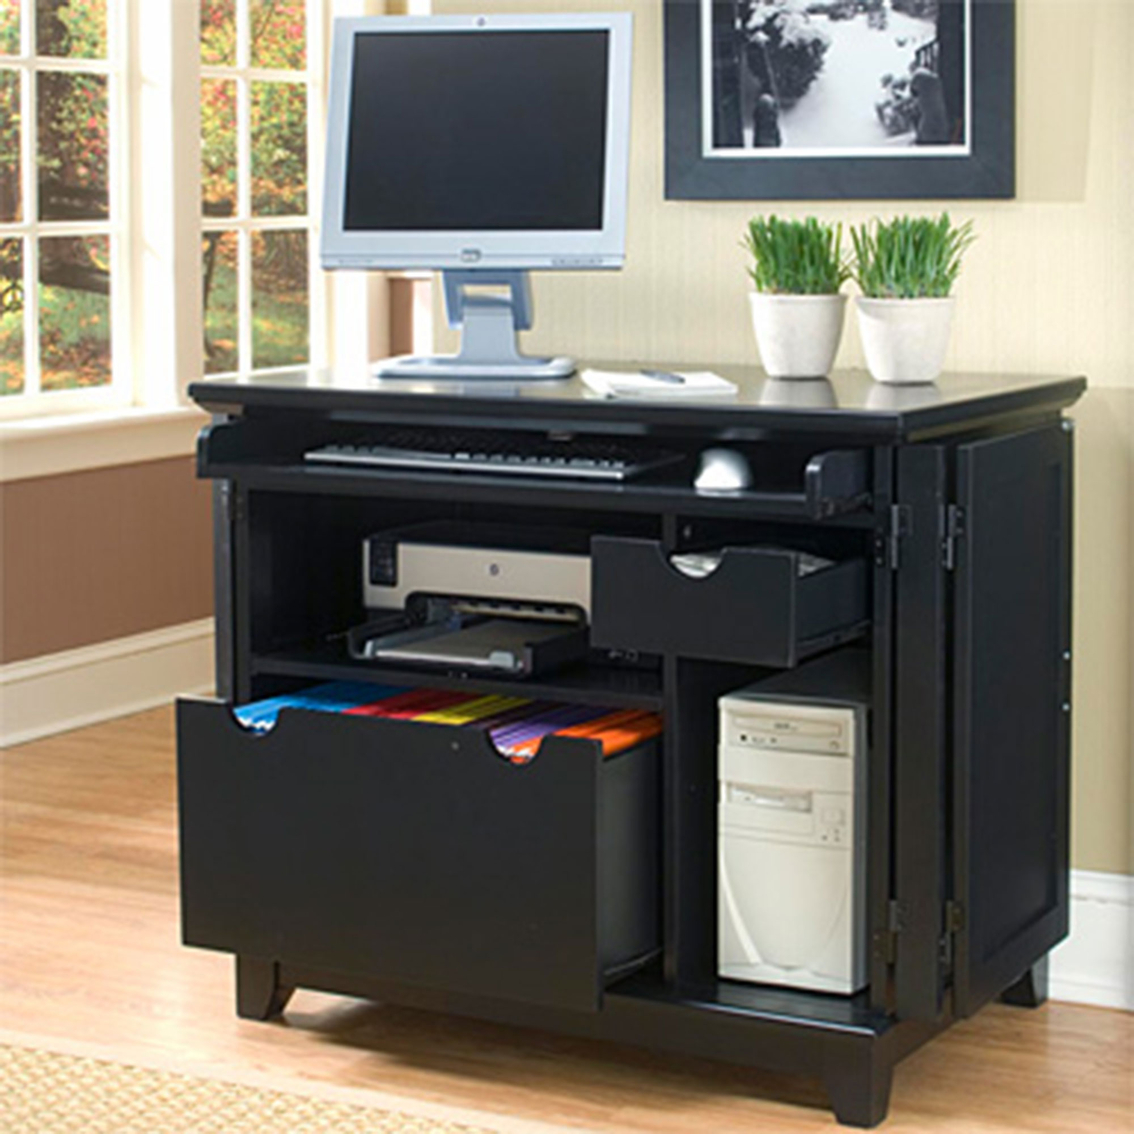 Home Styles Arts and Crafts Compact Computer Cabinet - Image 2 of 2